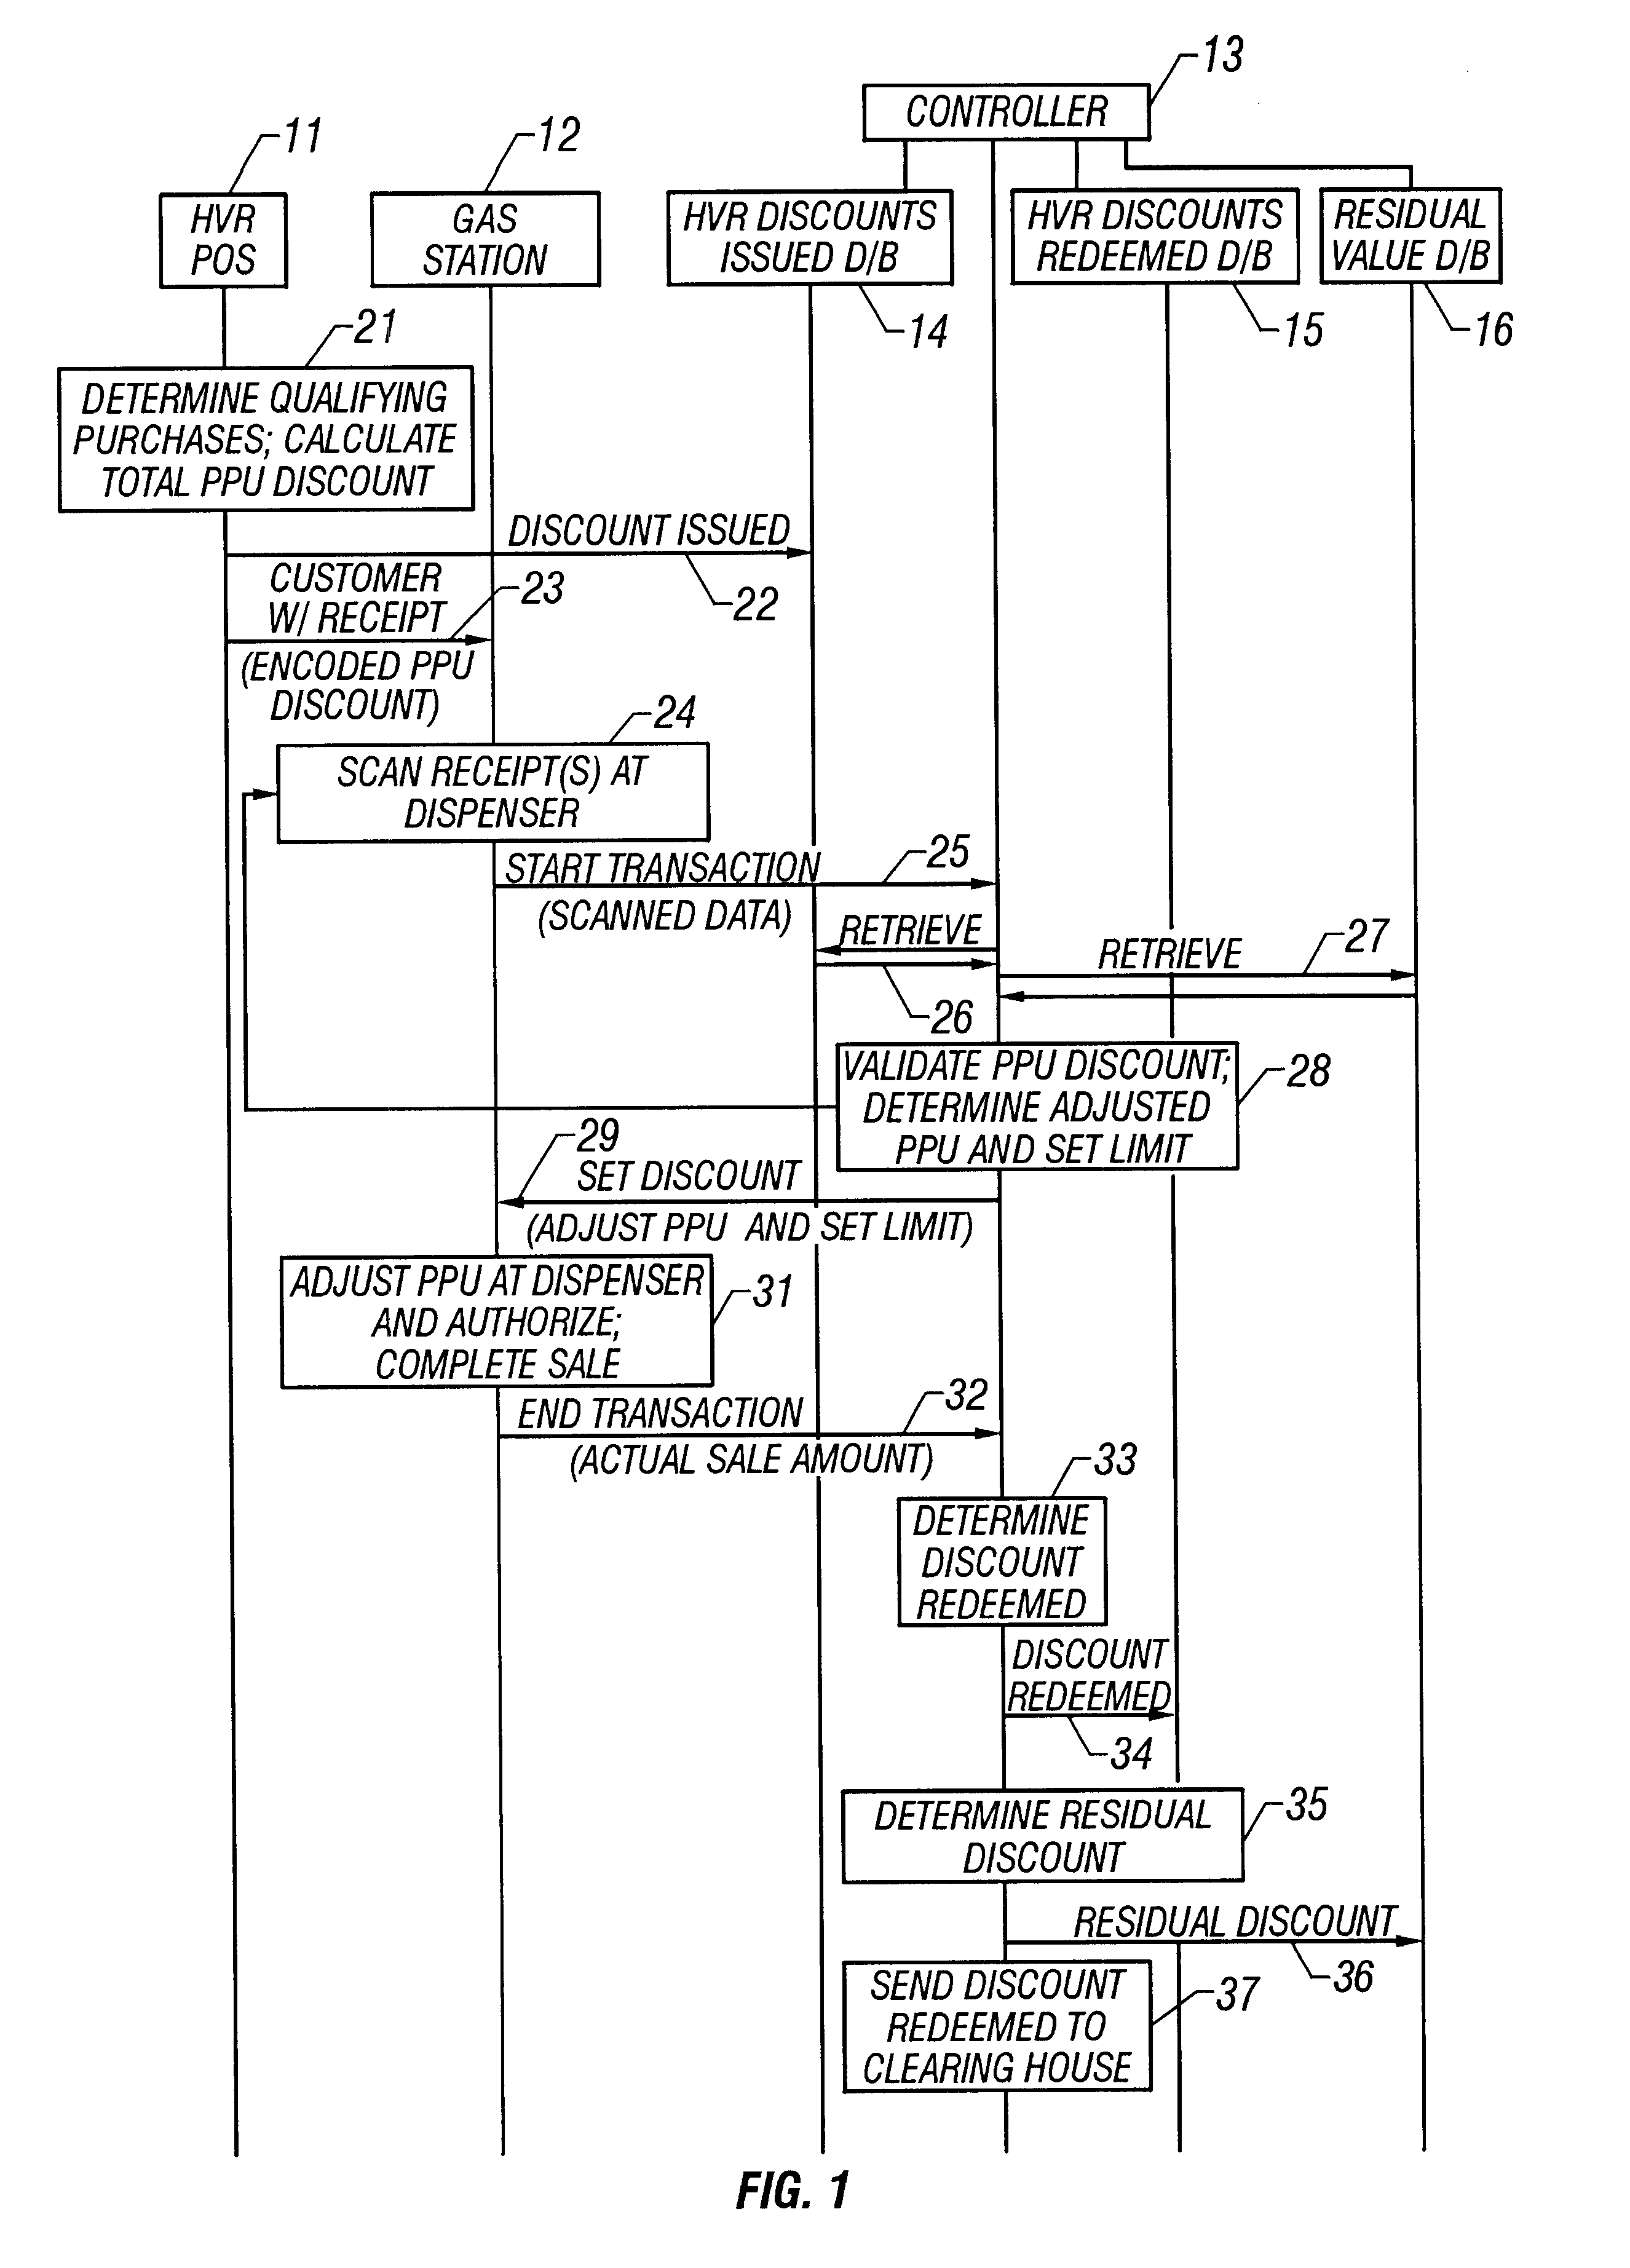 System and method of providing multiple level discounts on cross-marketed products and discounting a price-per-unit-volume of gasoline